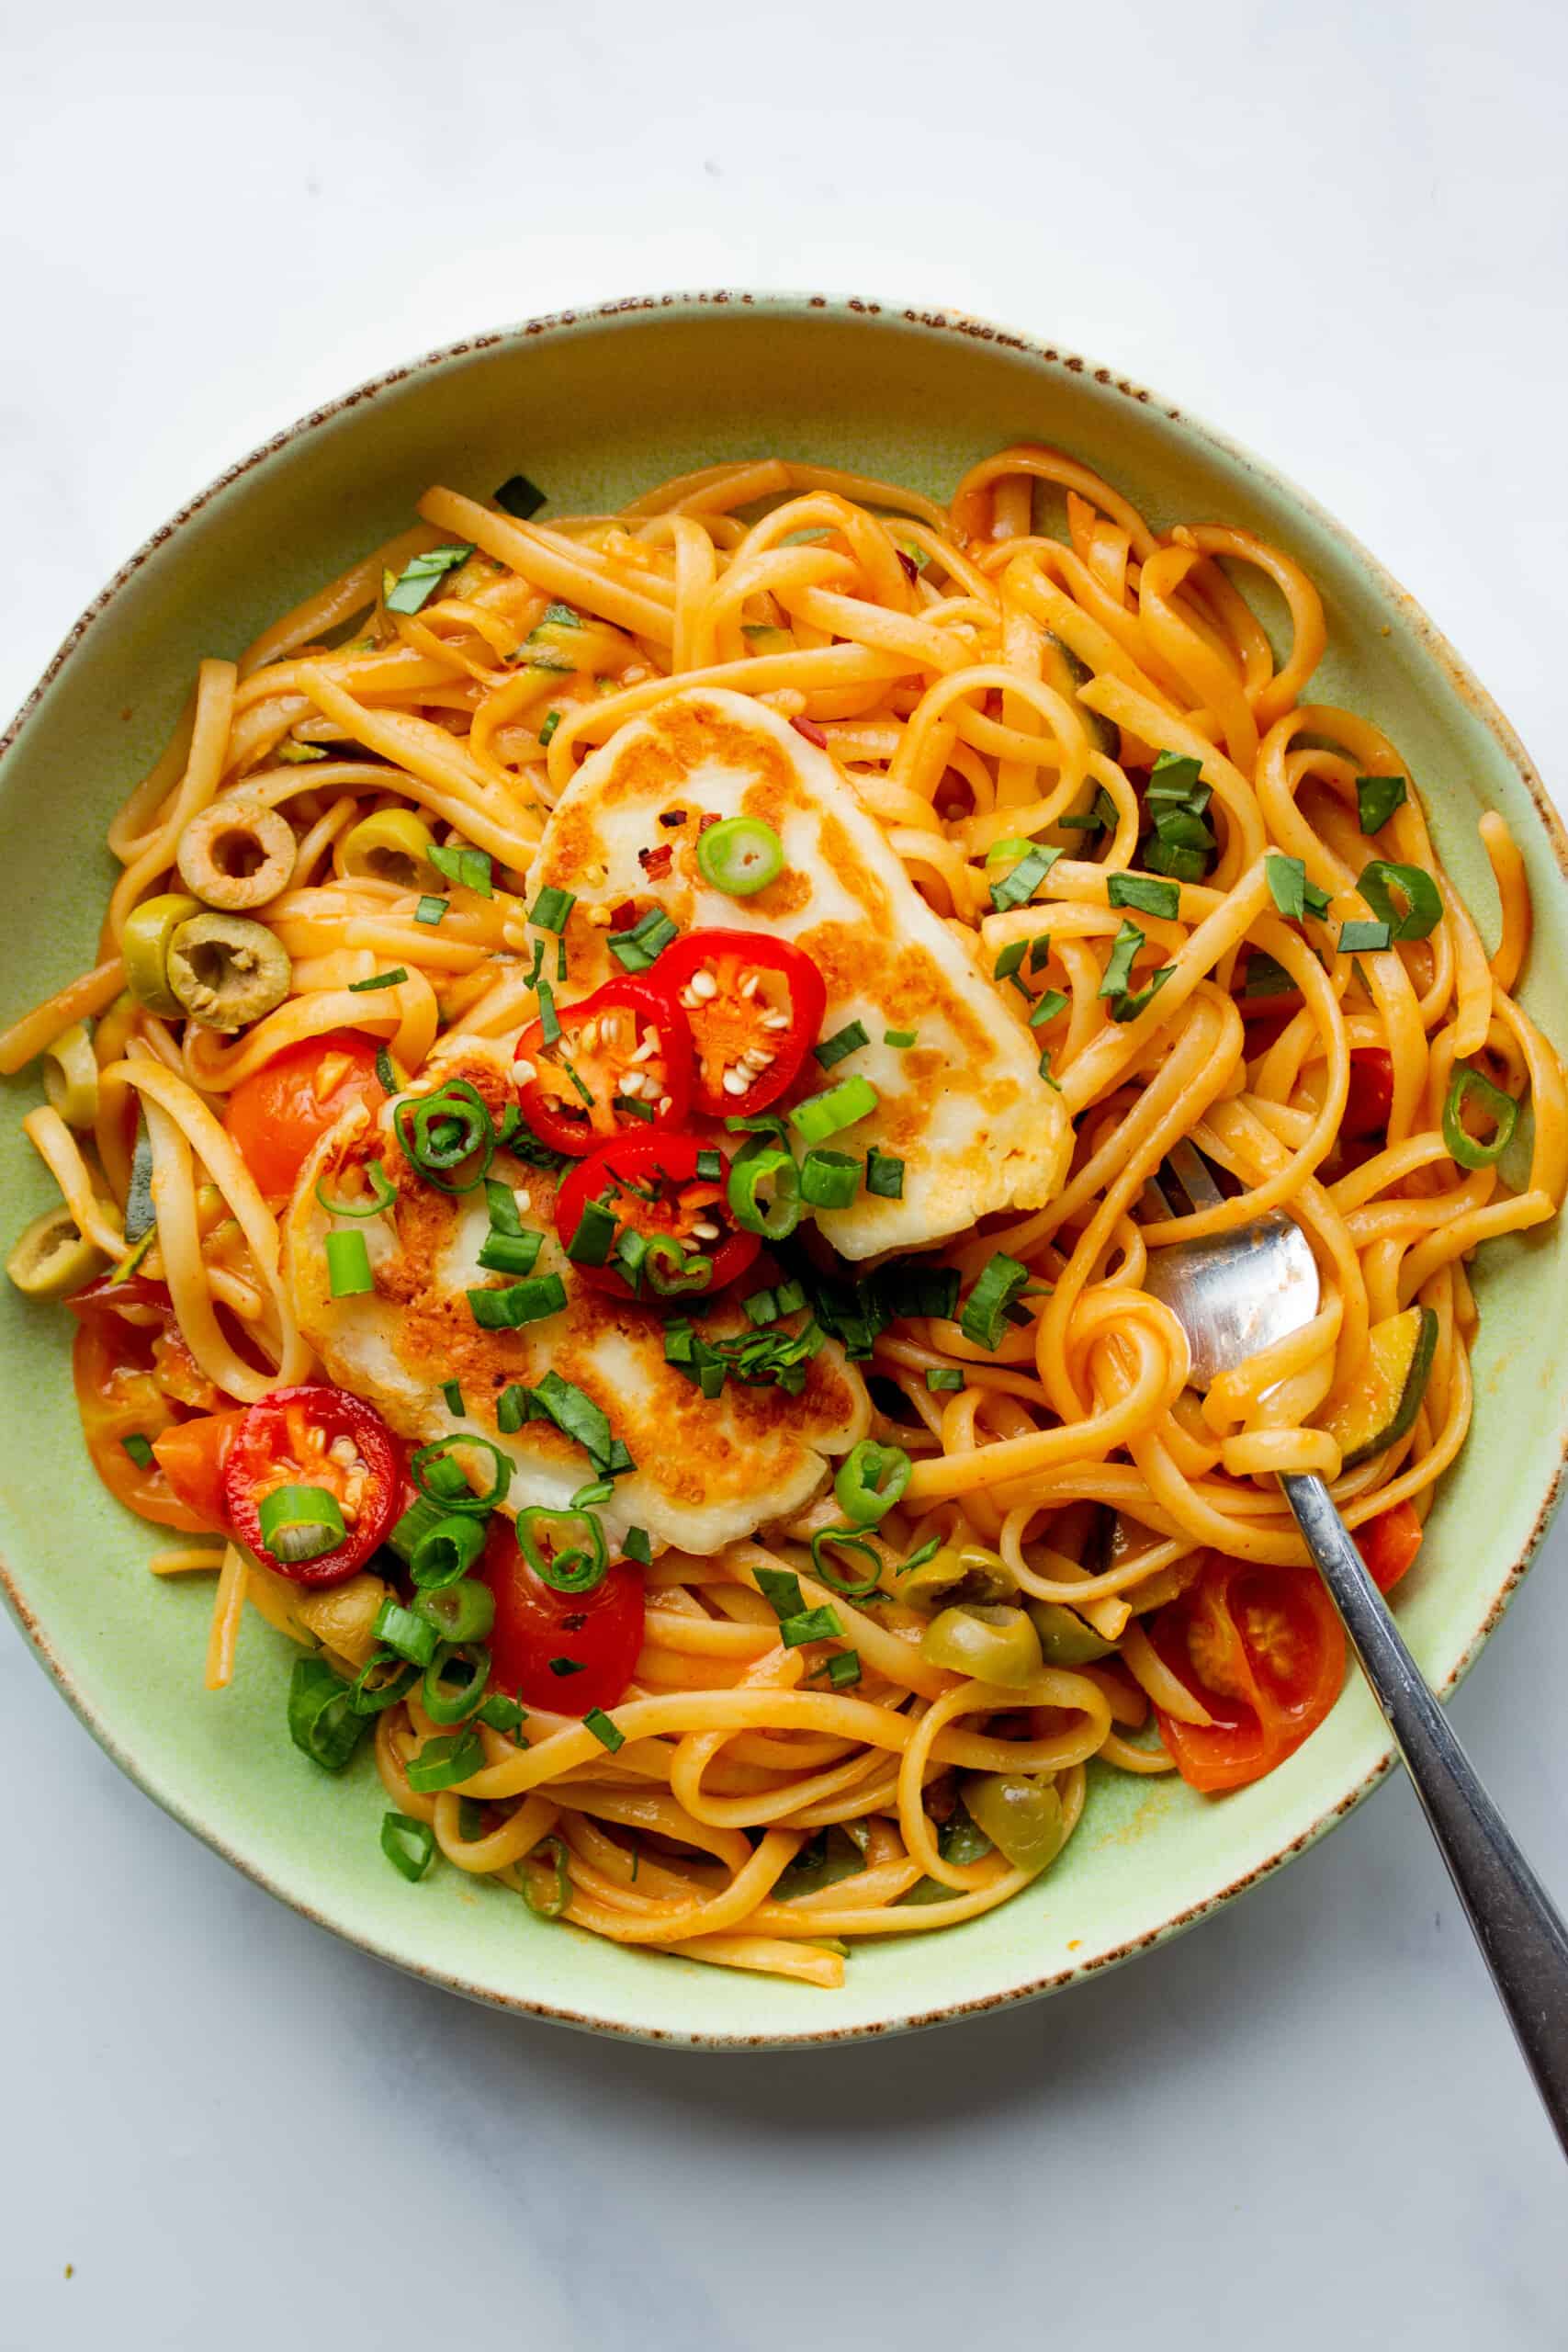 Halloumi pasta served in a pale green bowl with golden browned halloumi, slices of spring onion, chillies and tomatoes with a fork.